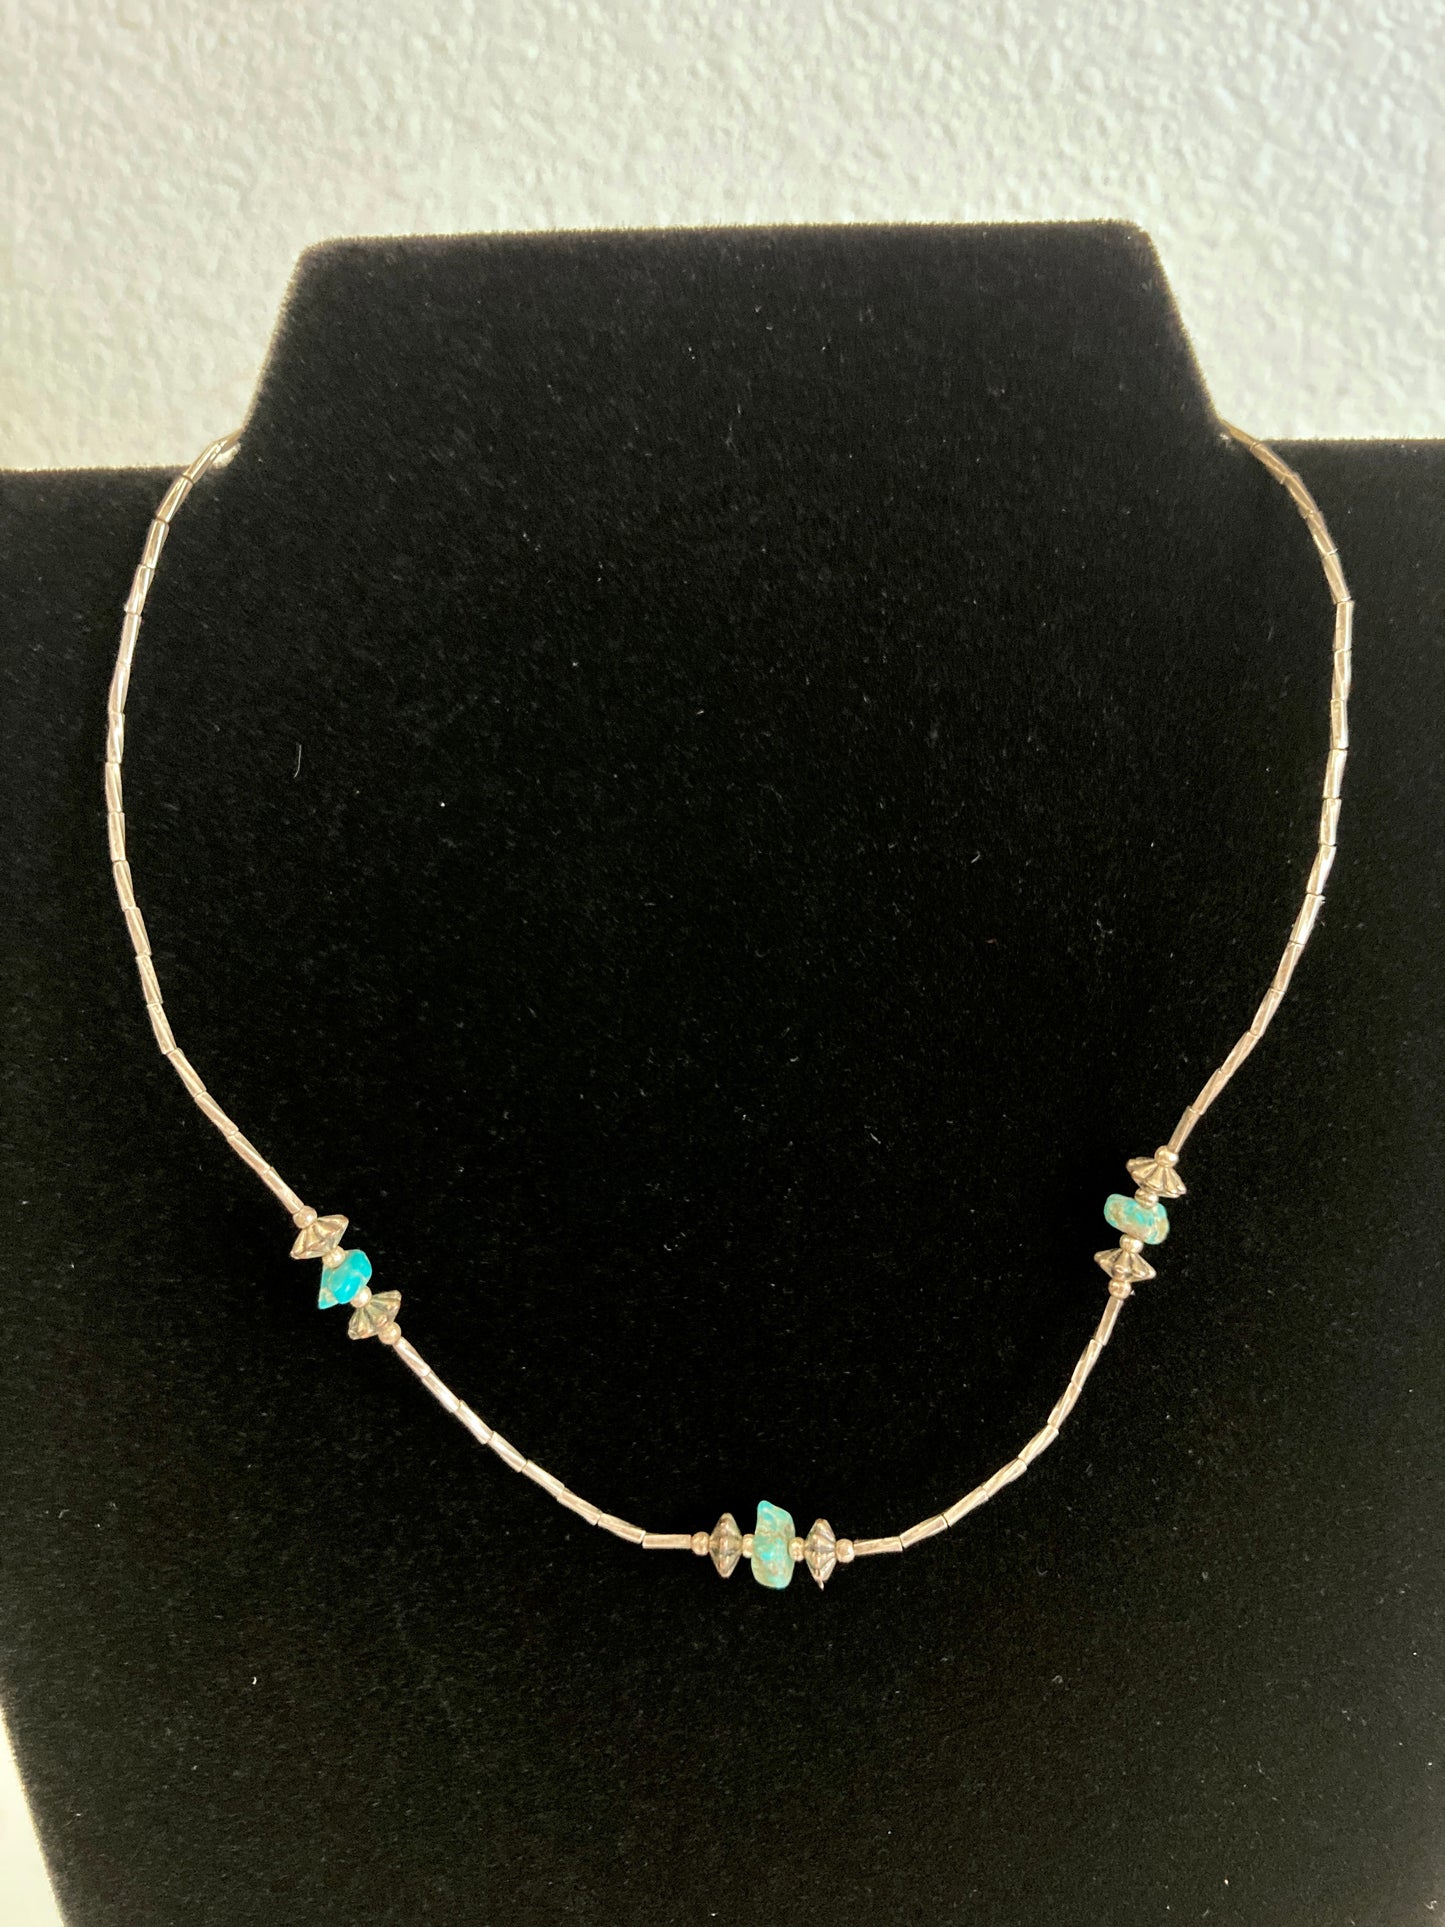 1970s Twisted Liquid Silver and Turquoise Necklace